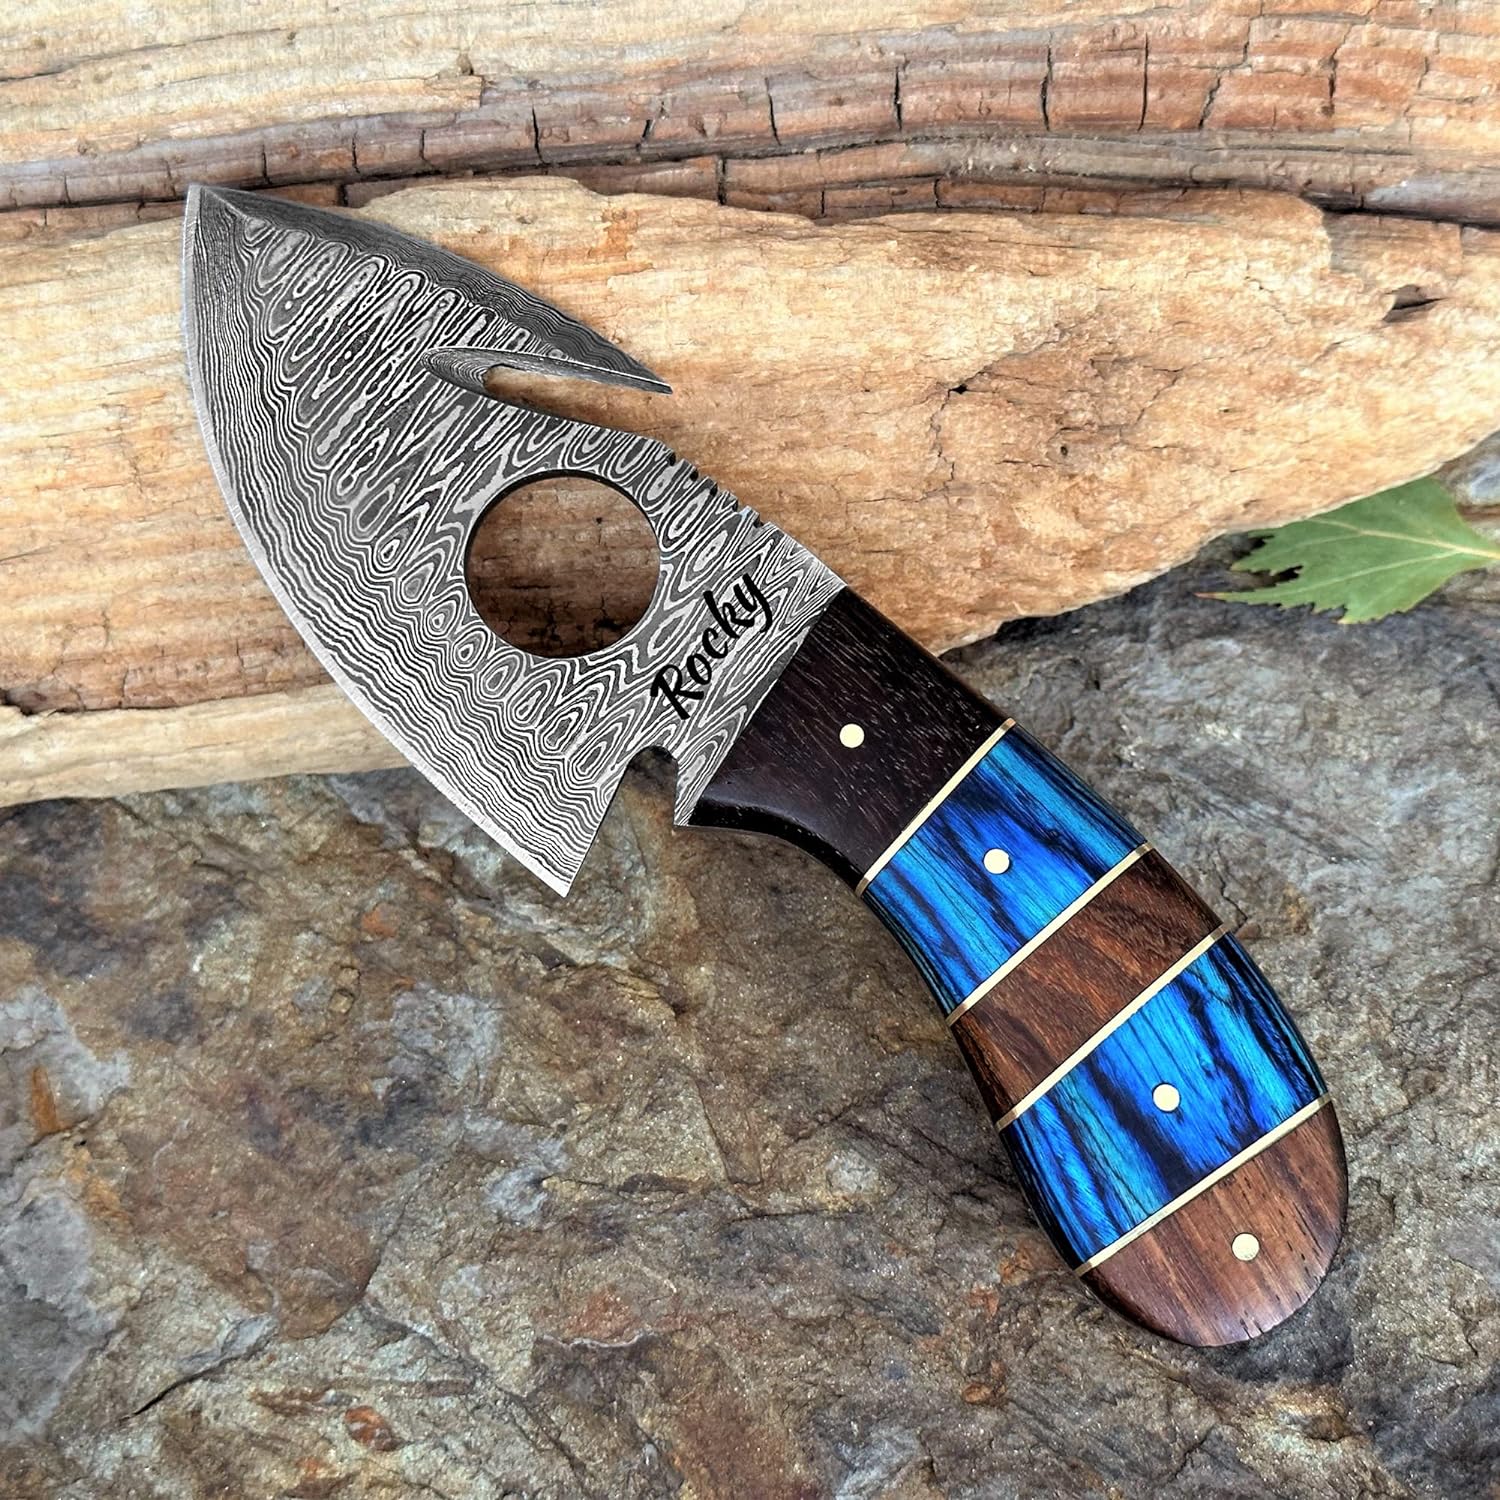 Damascus Steel Fixed Blade Gut Hook Knife With Wood Handle - 7 Inches -  Louis Martin Knives